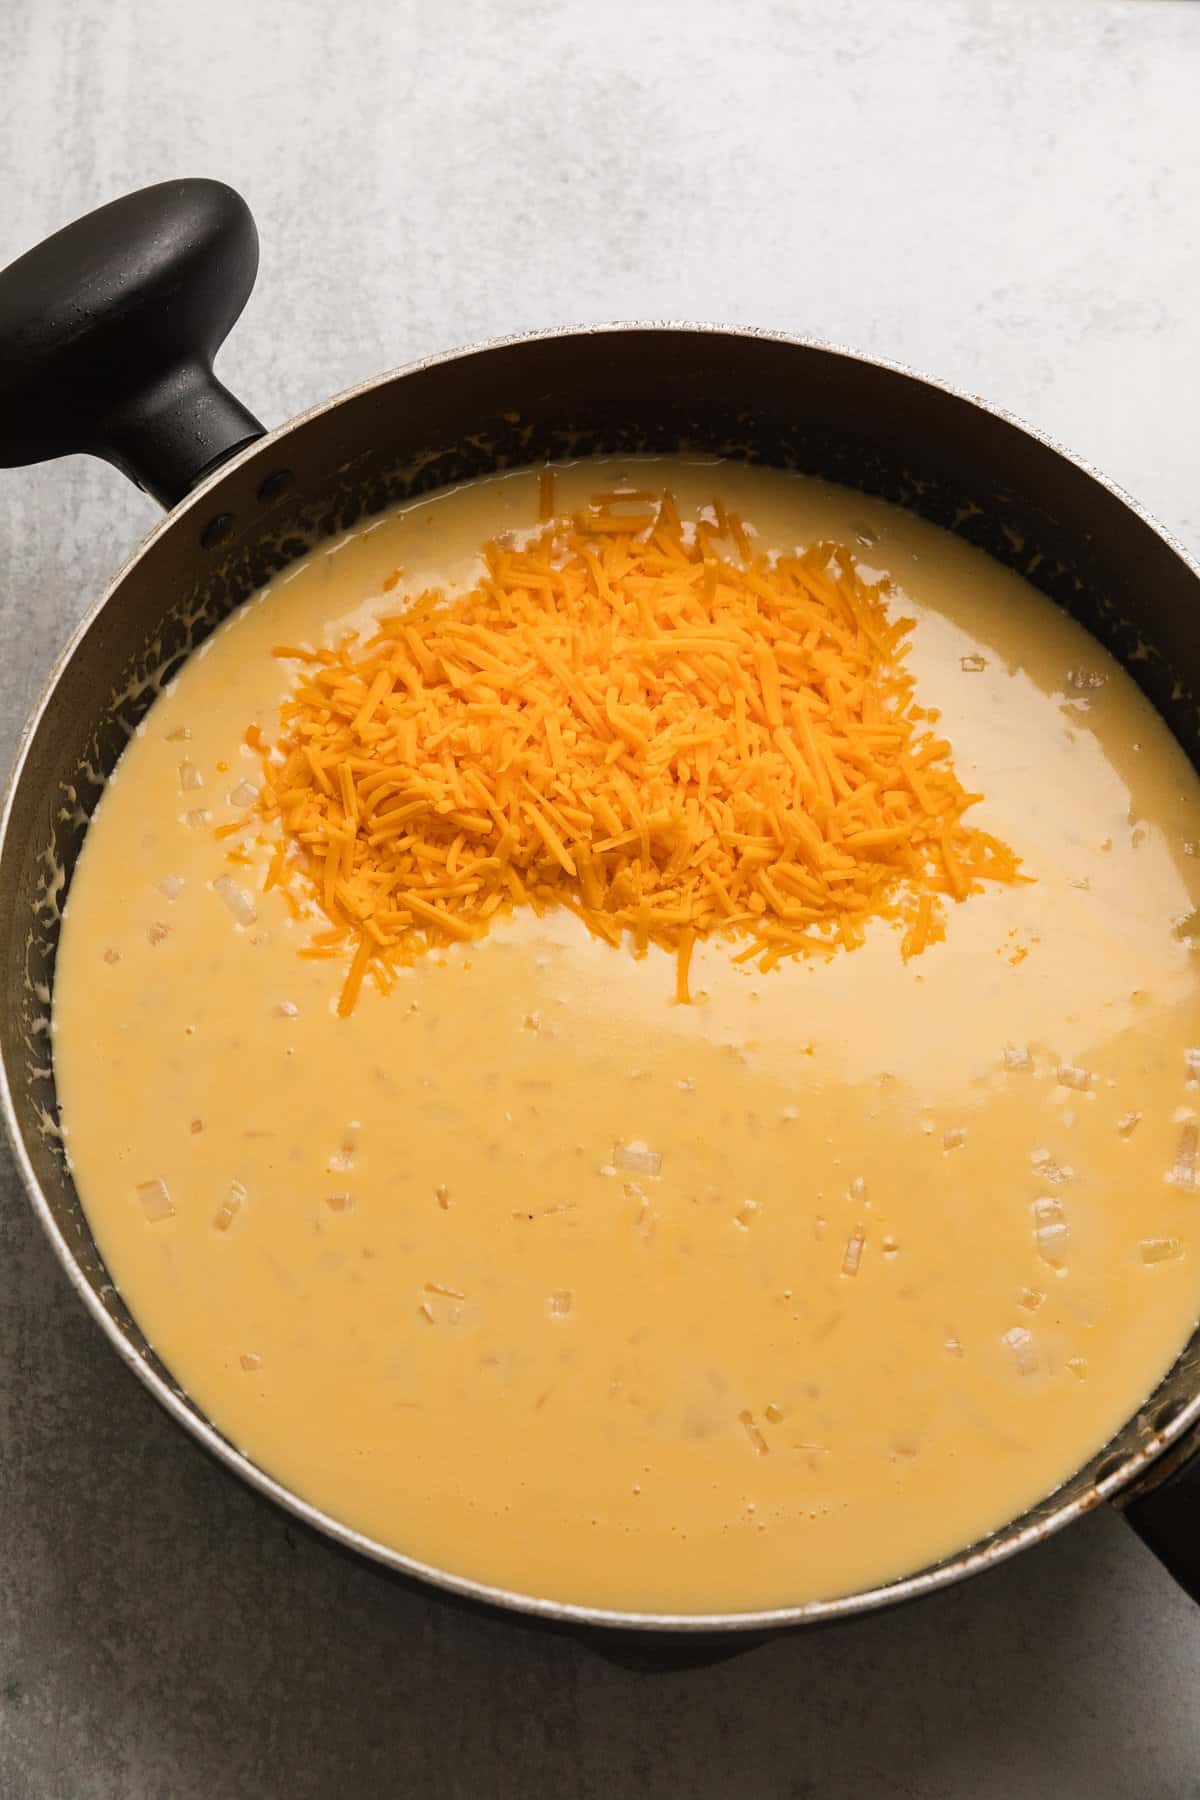 adding shredded cheese to make the recipe